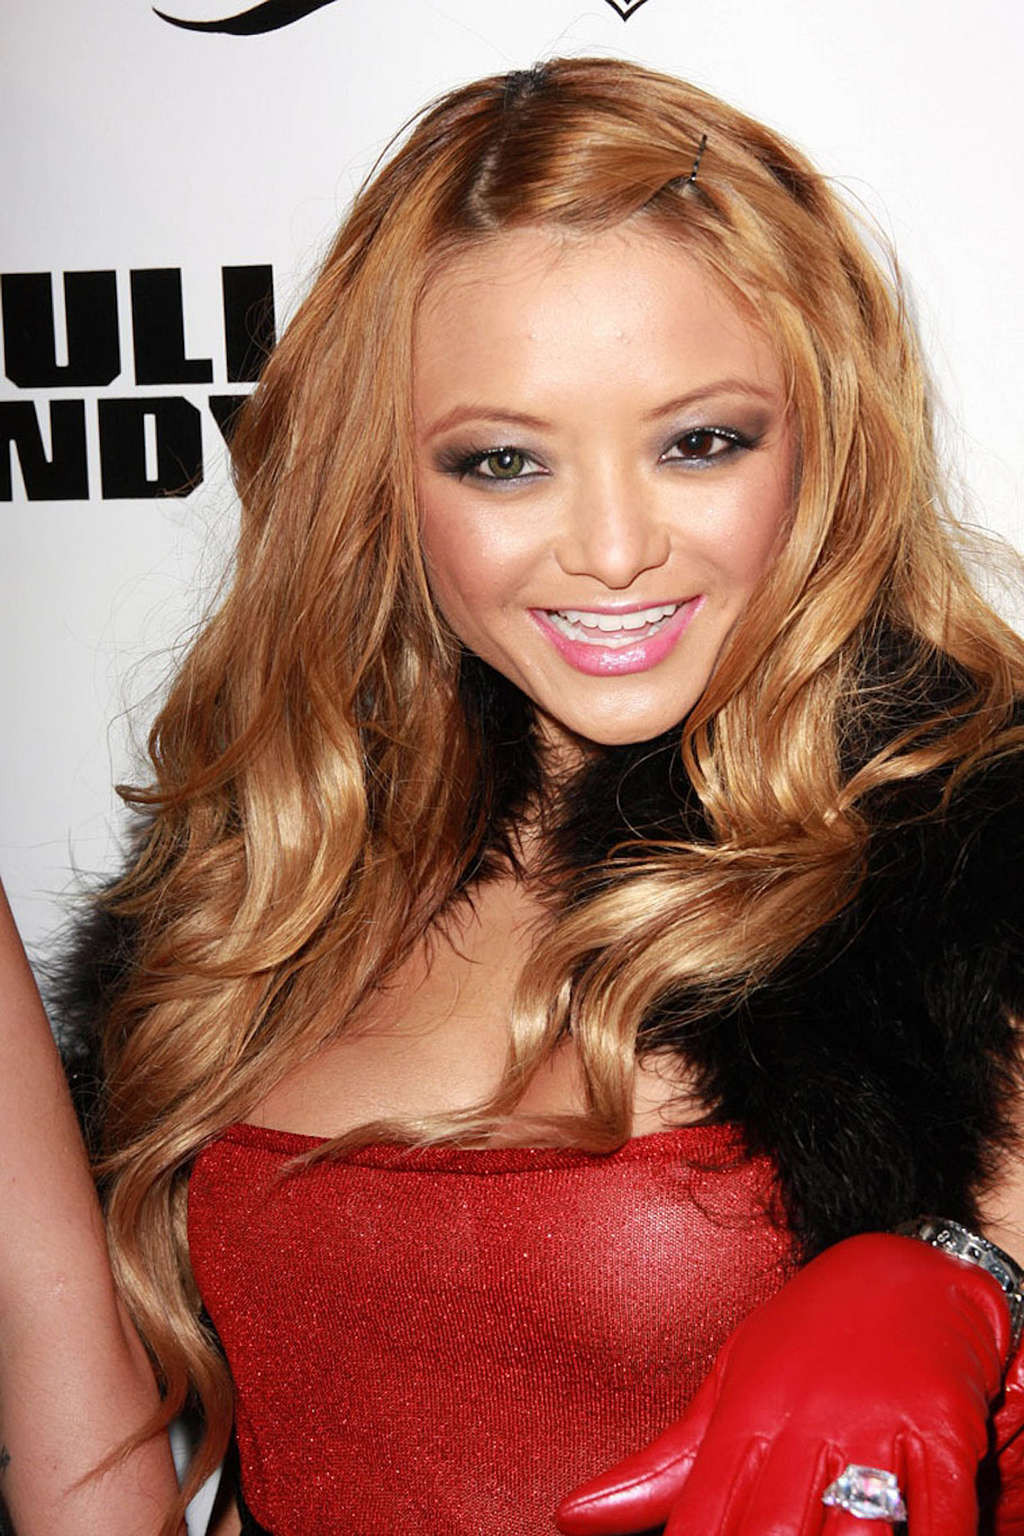 Tila Tequila nipple slip in public paparazzi pictures and exposing her nice big  #75370159